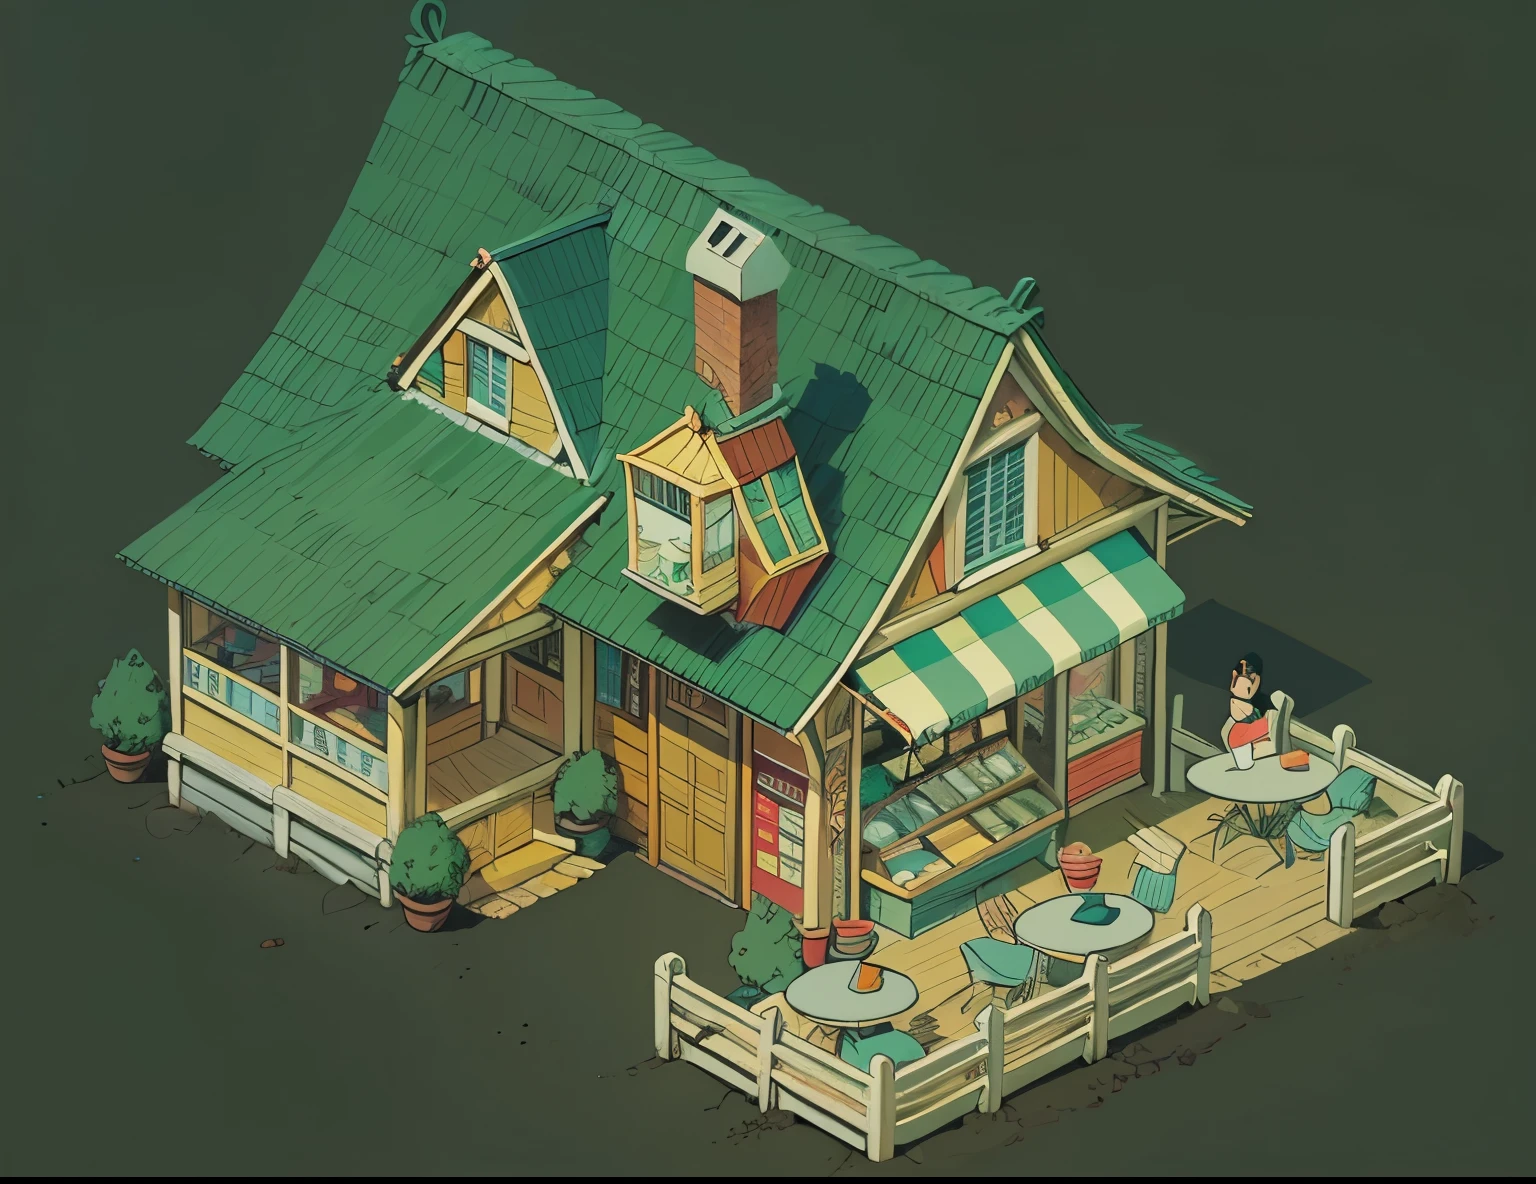 hand painted isometric illustration of a coffee shop, Cafeteria, with blue roof, red brick chuimena,airplane isometric 